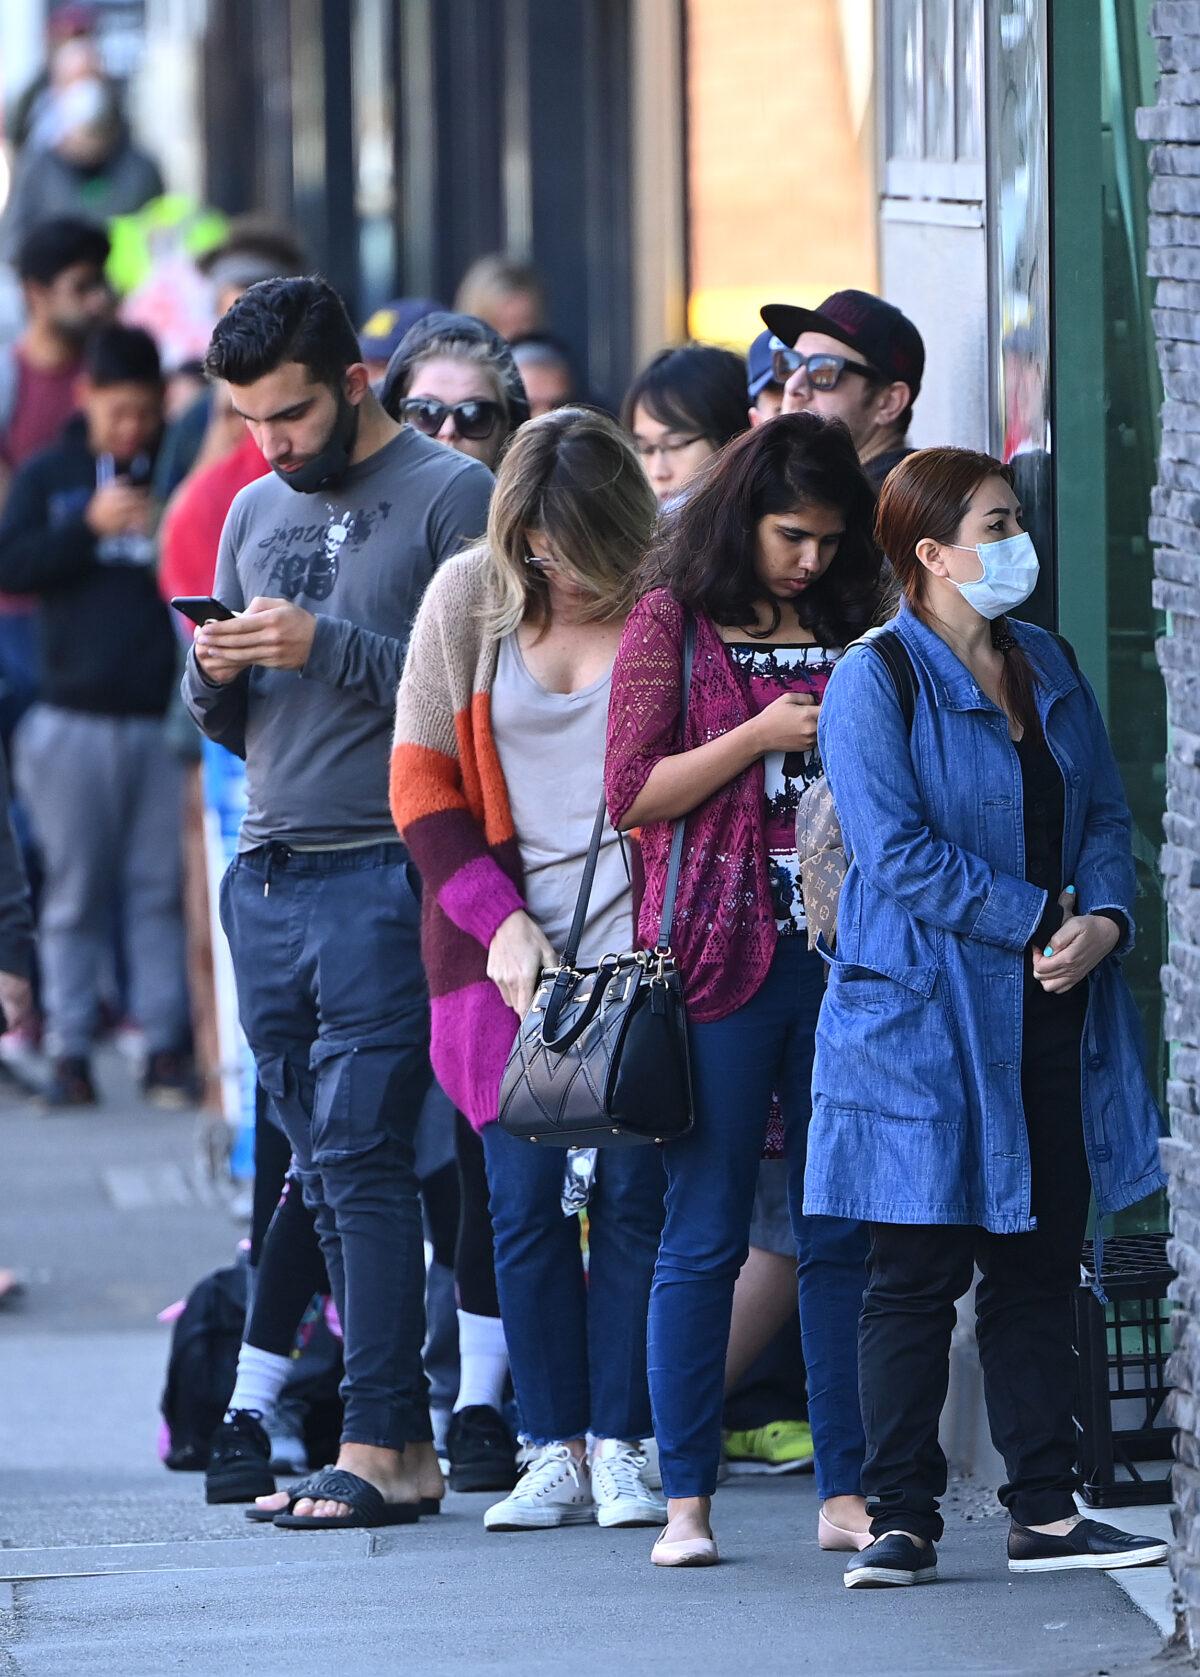 People wait in line to enter Centrelink in Melbourne, Australia, on March 24, 2020. (Quinn Rooney/Getty Images)